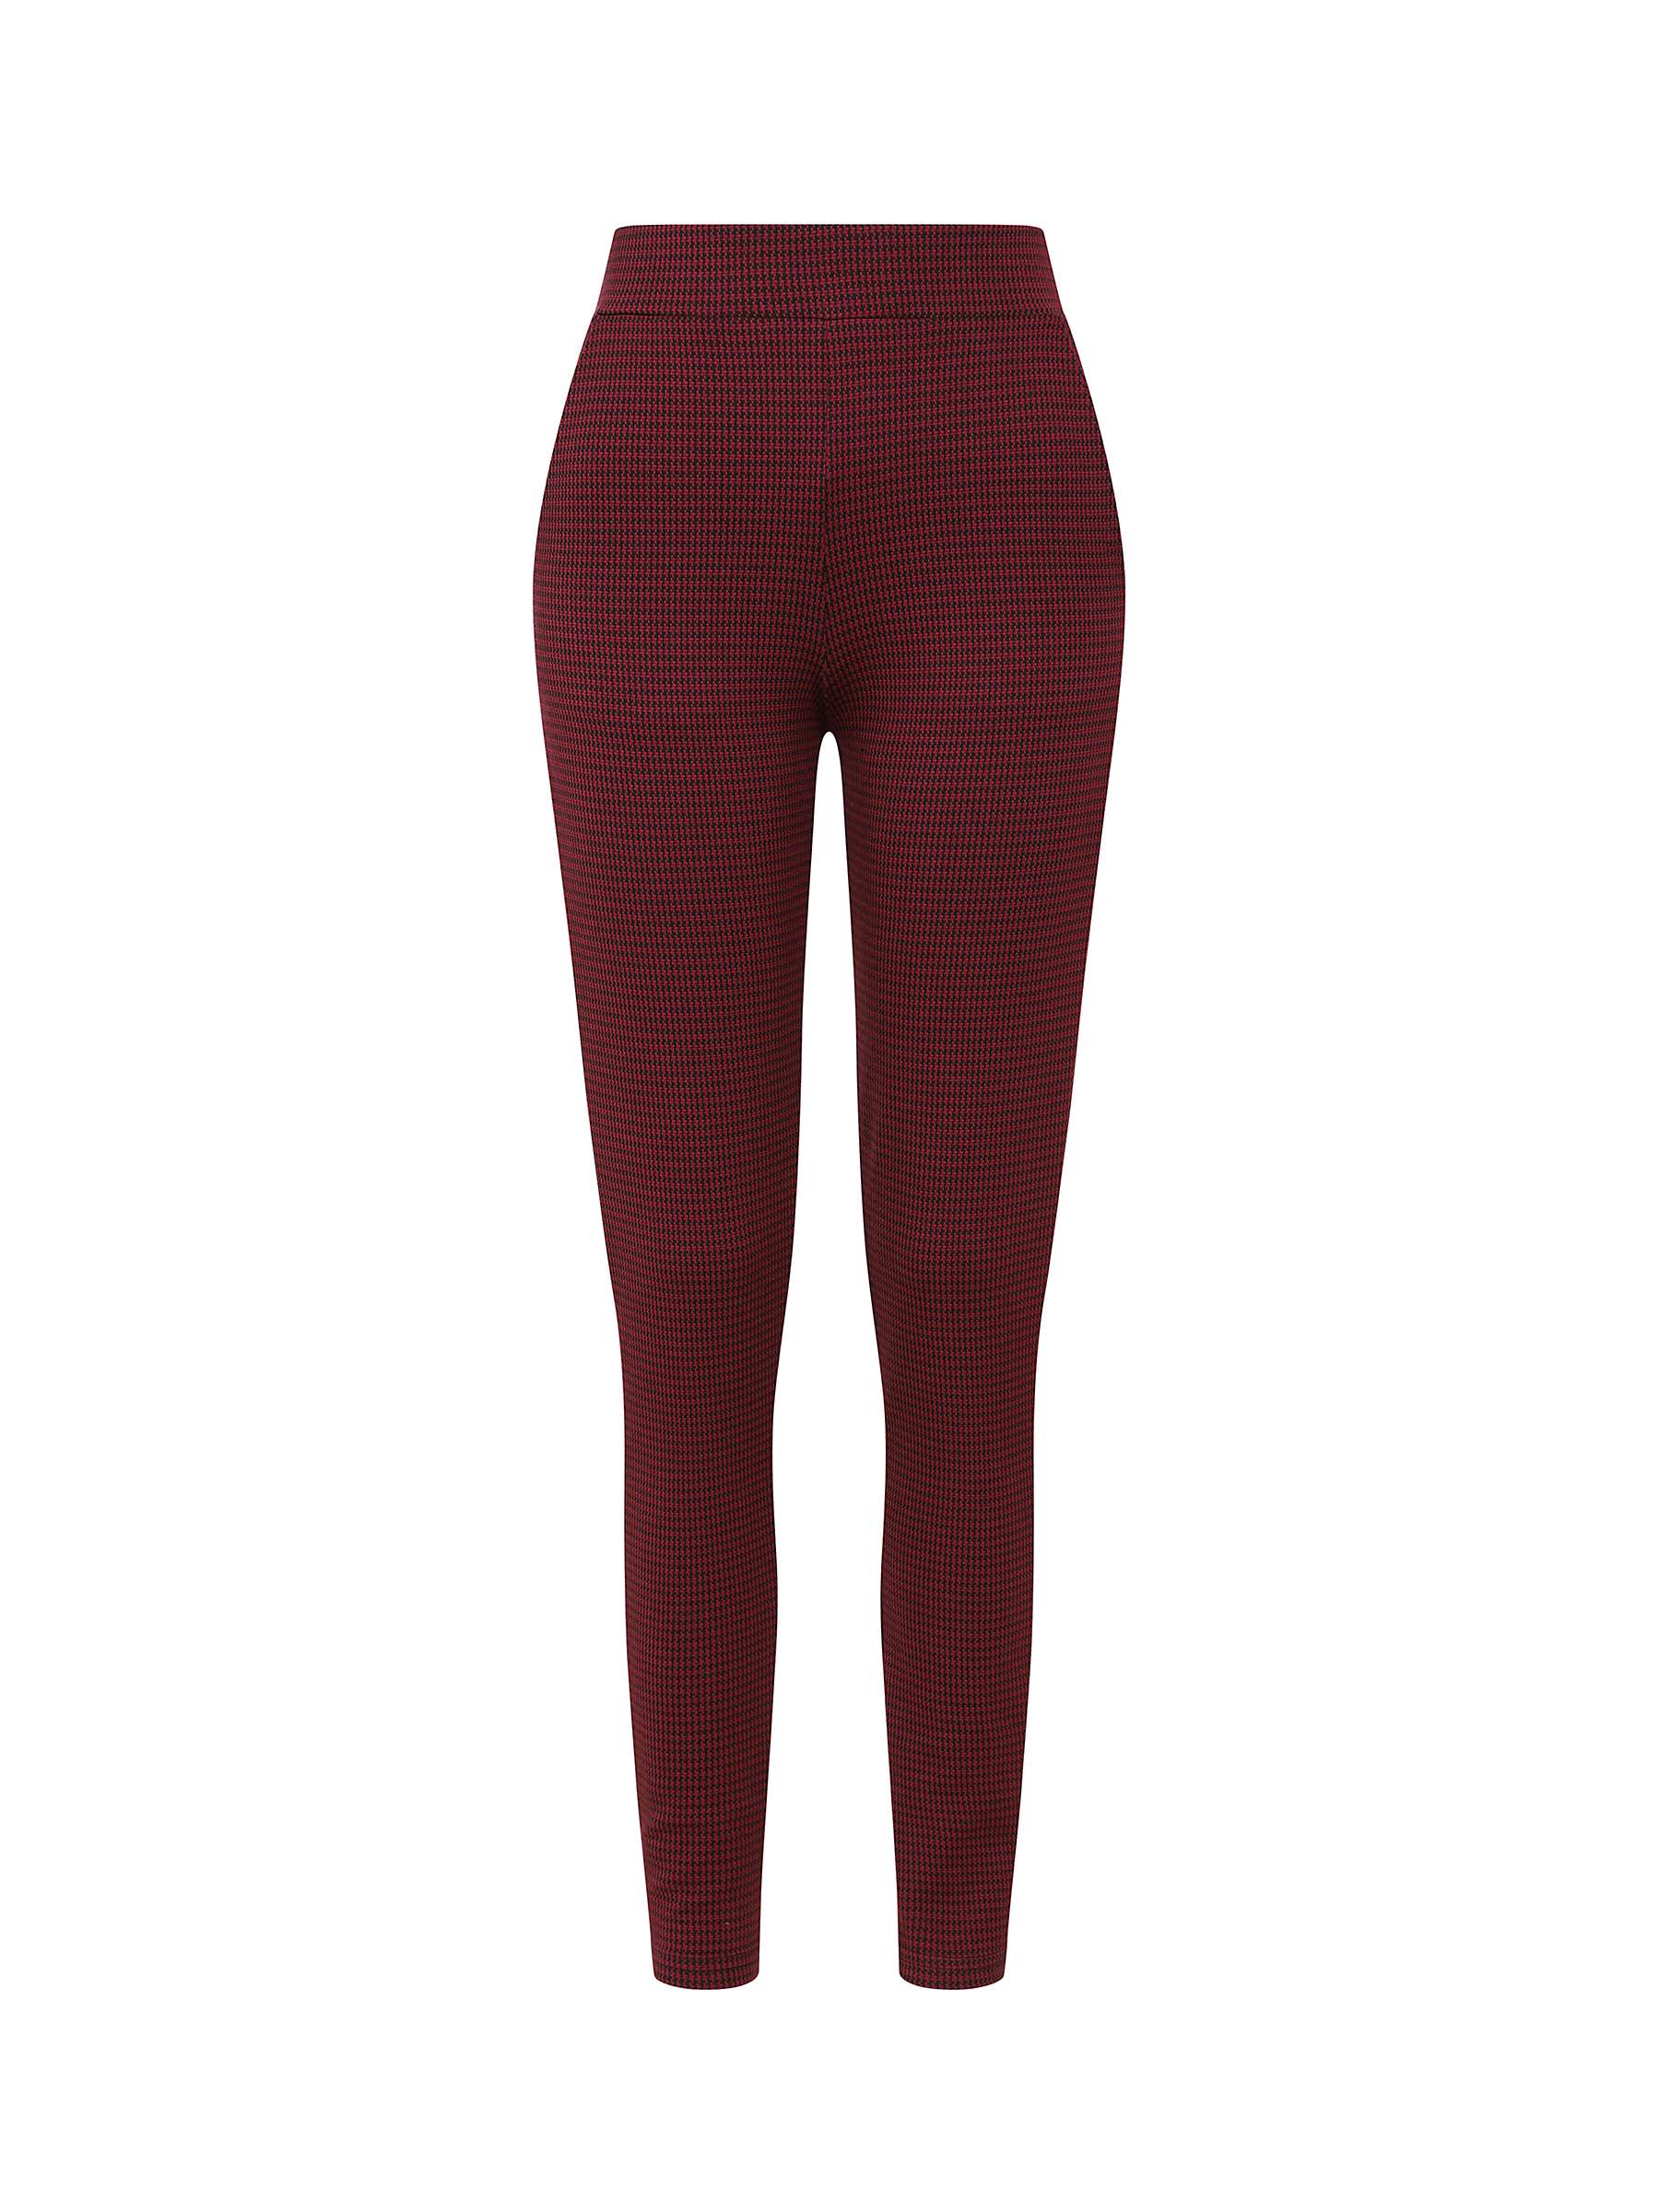 Buy HotSquash Premium Stretch Skinny Trouser, Red Houndstooth Online at johnlewis.com